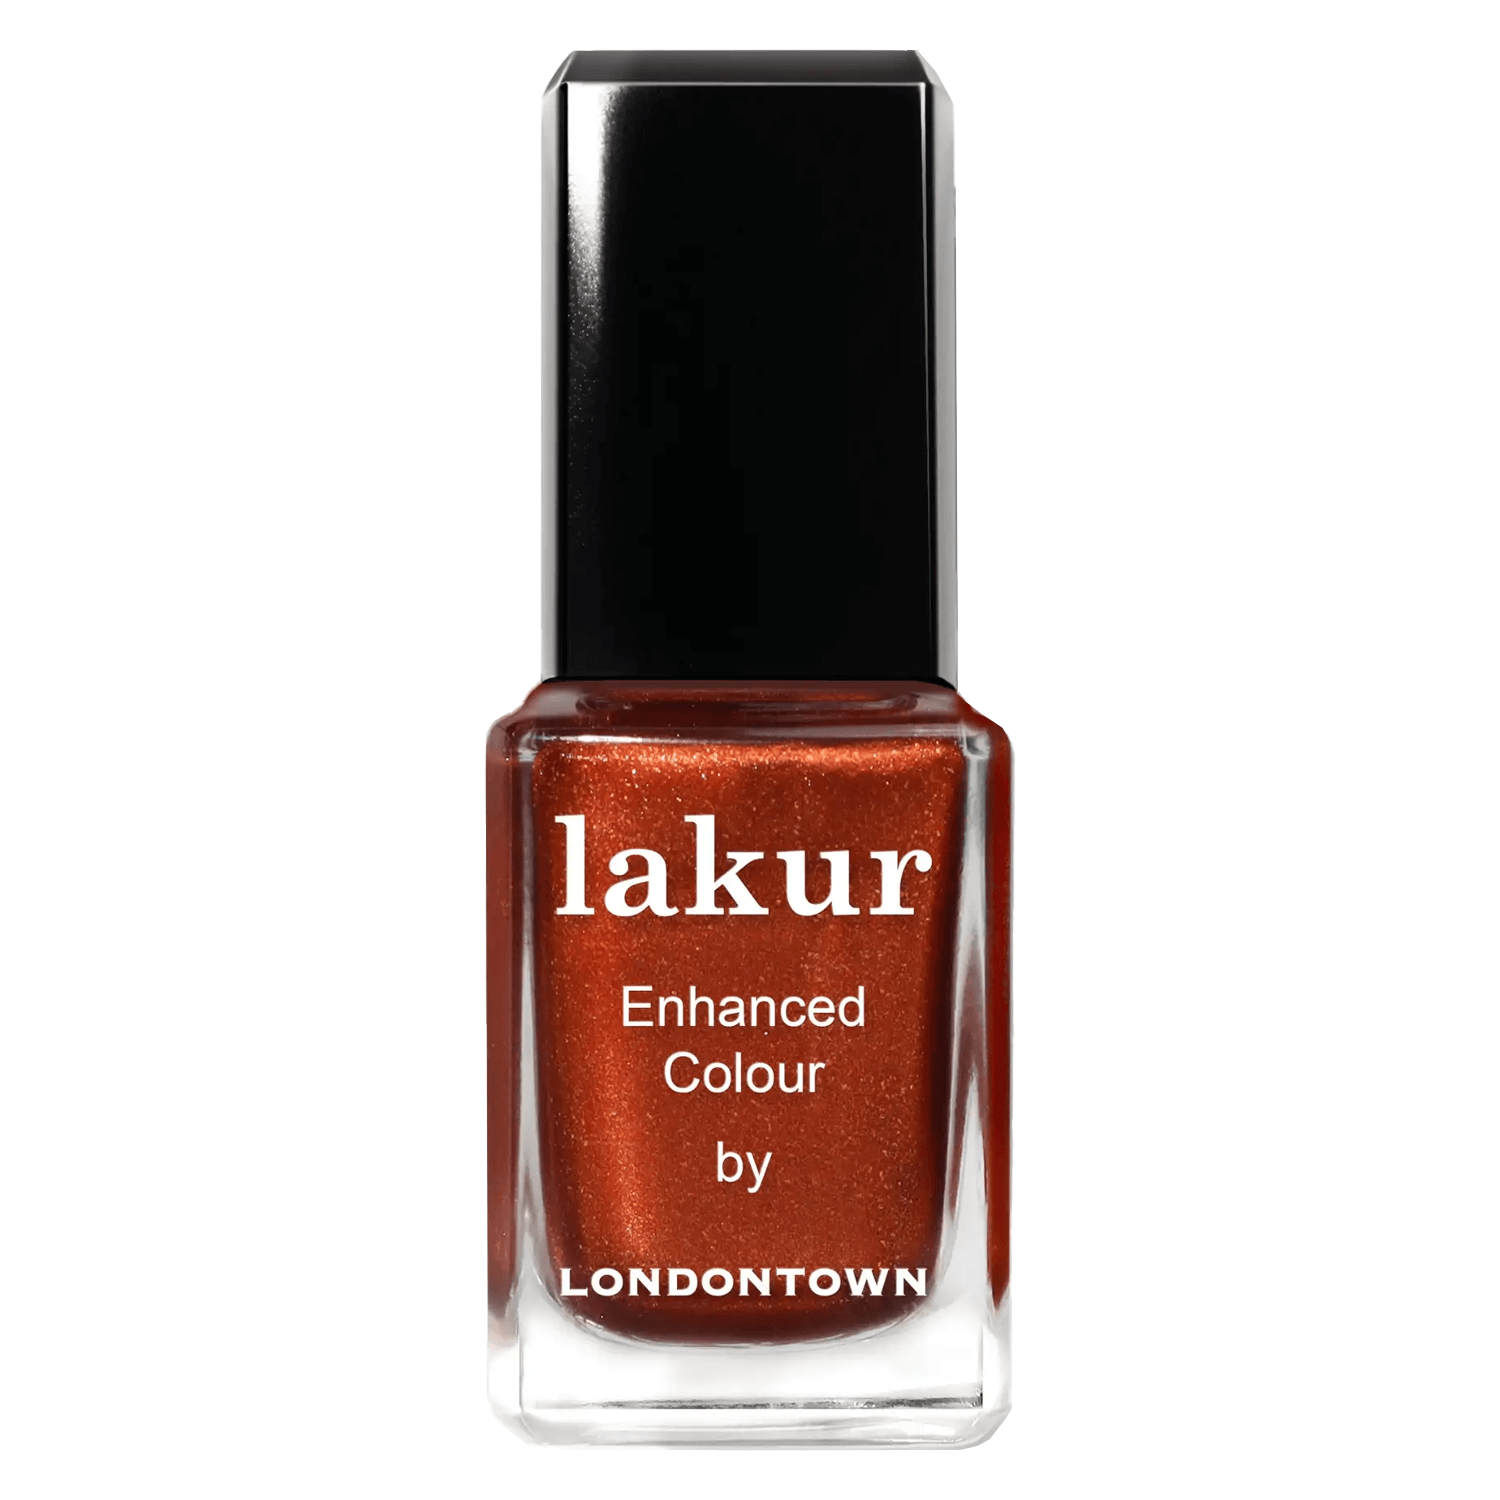 Product image from lakur - Posh Forever